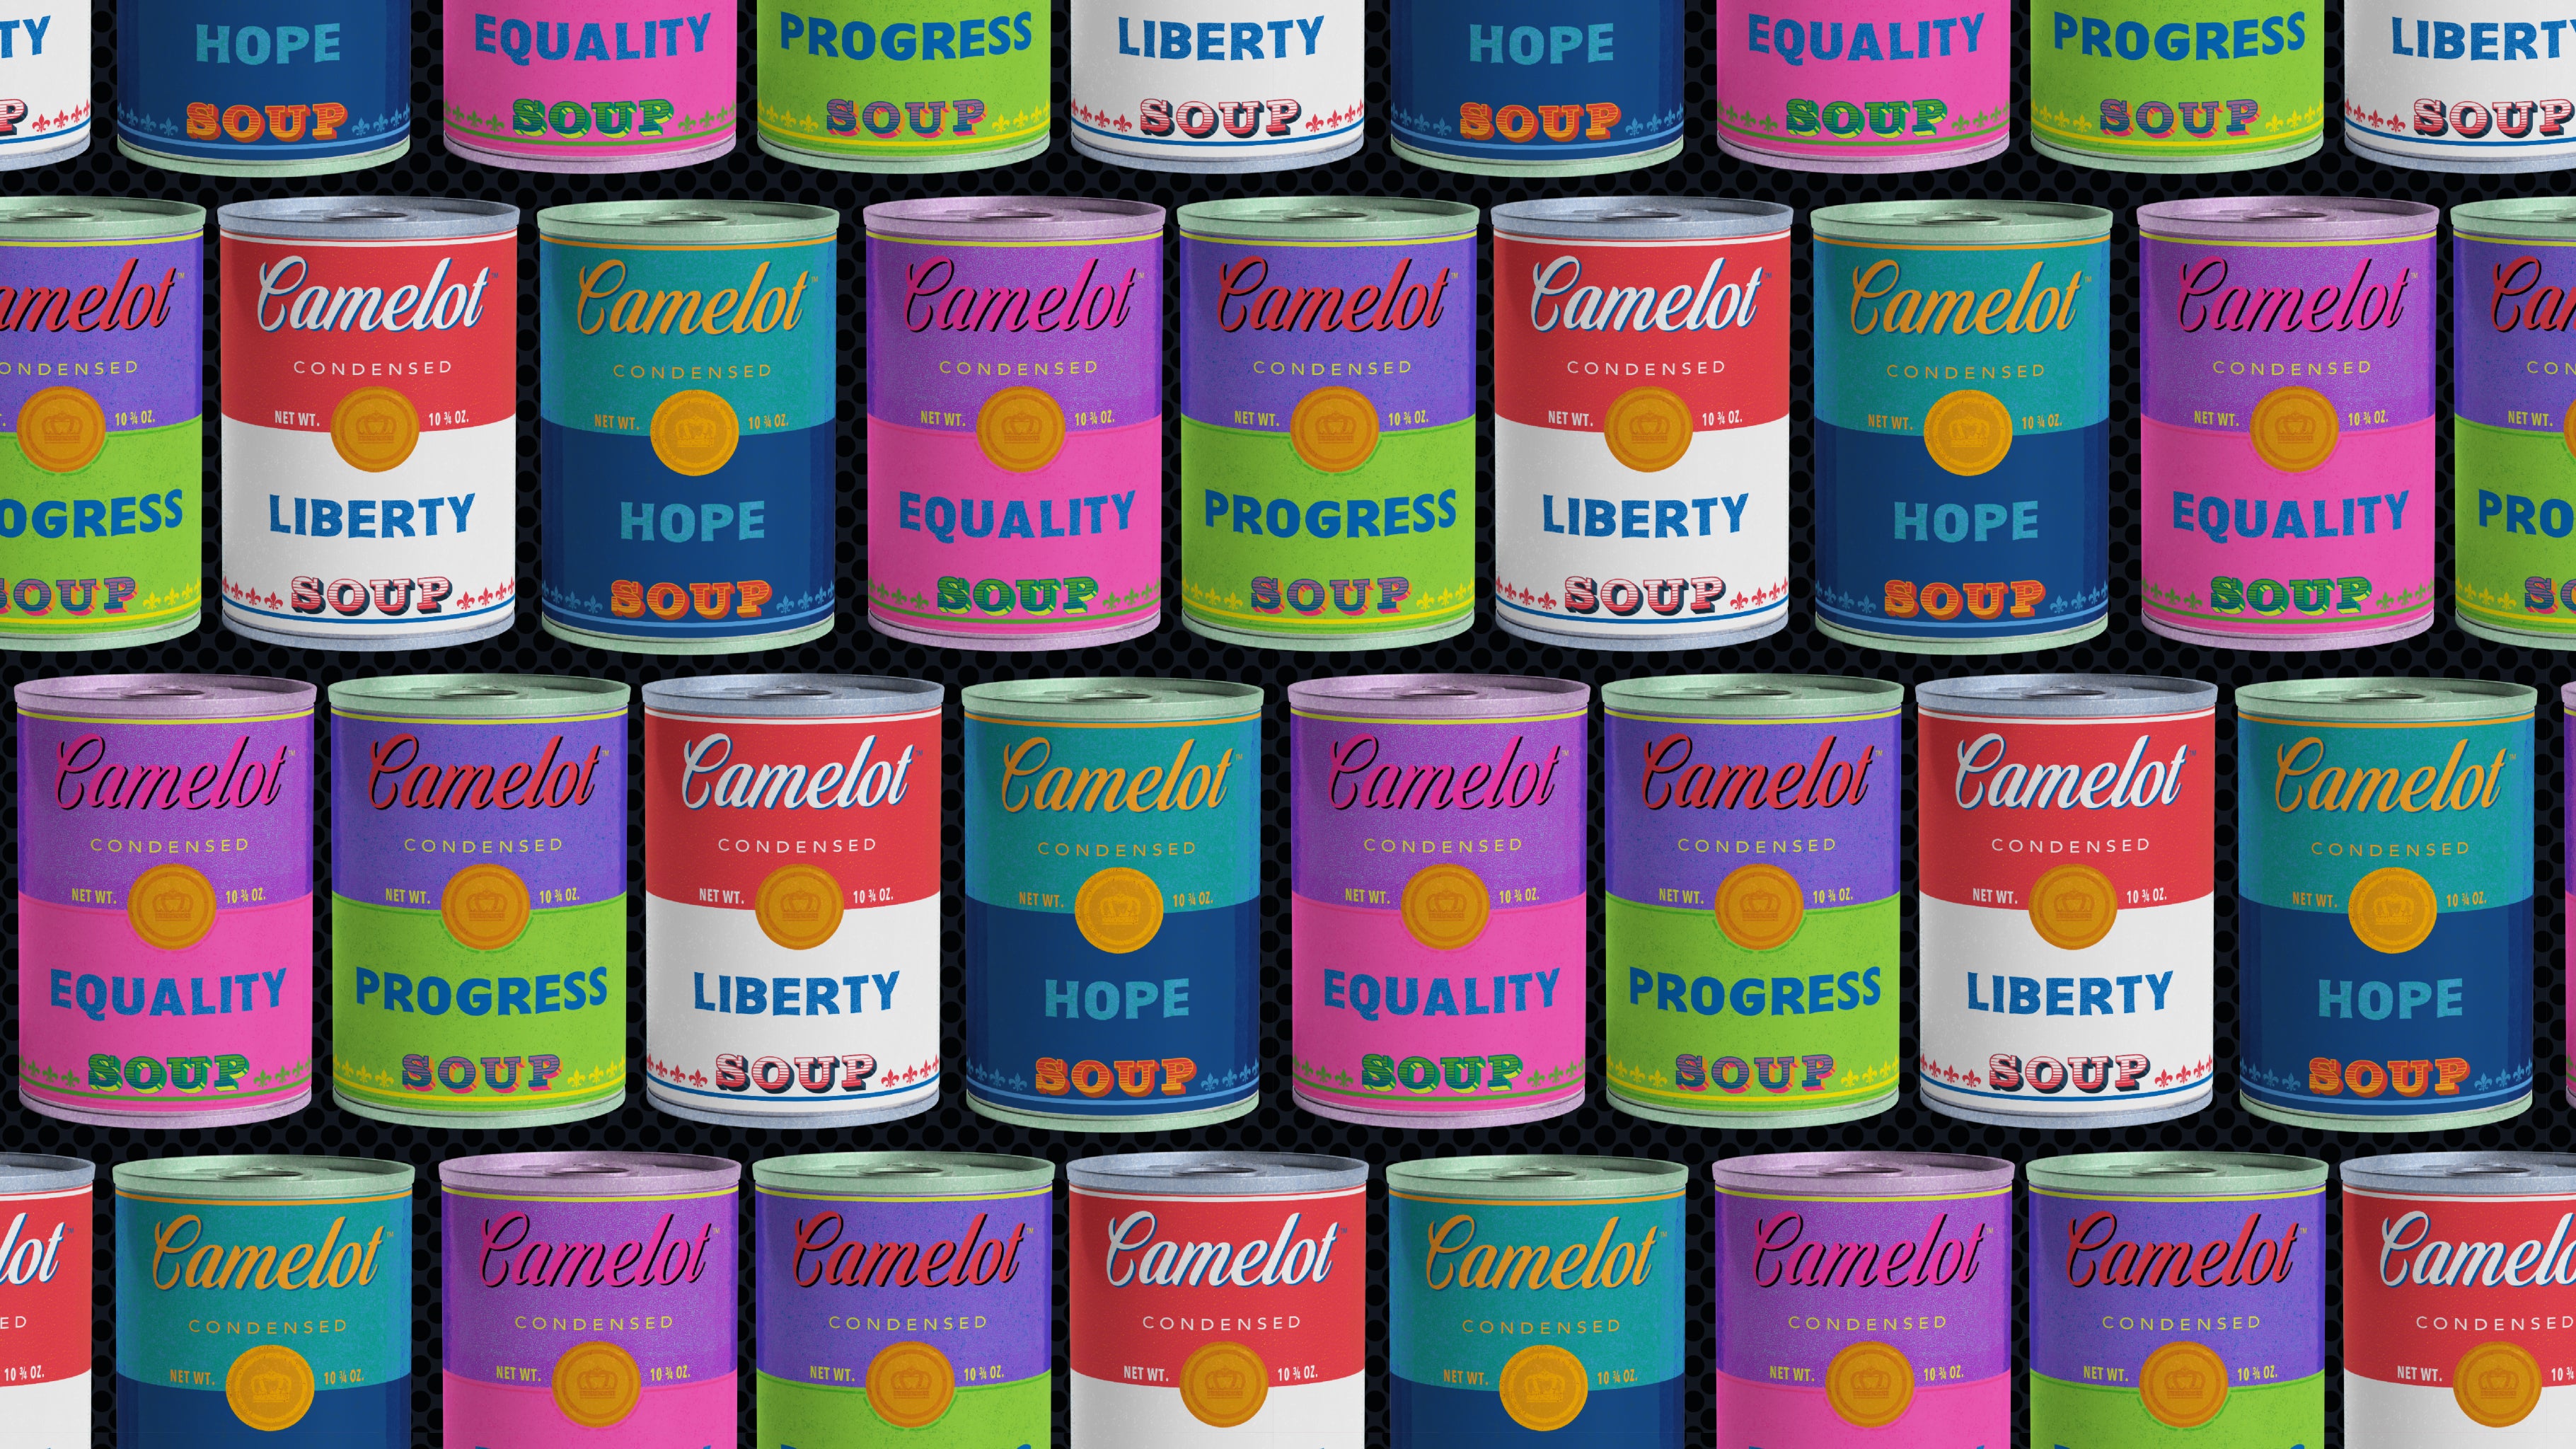 Camelot Soup Cans on Graphite, by Studio Ten Design